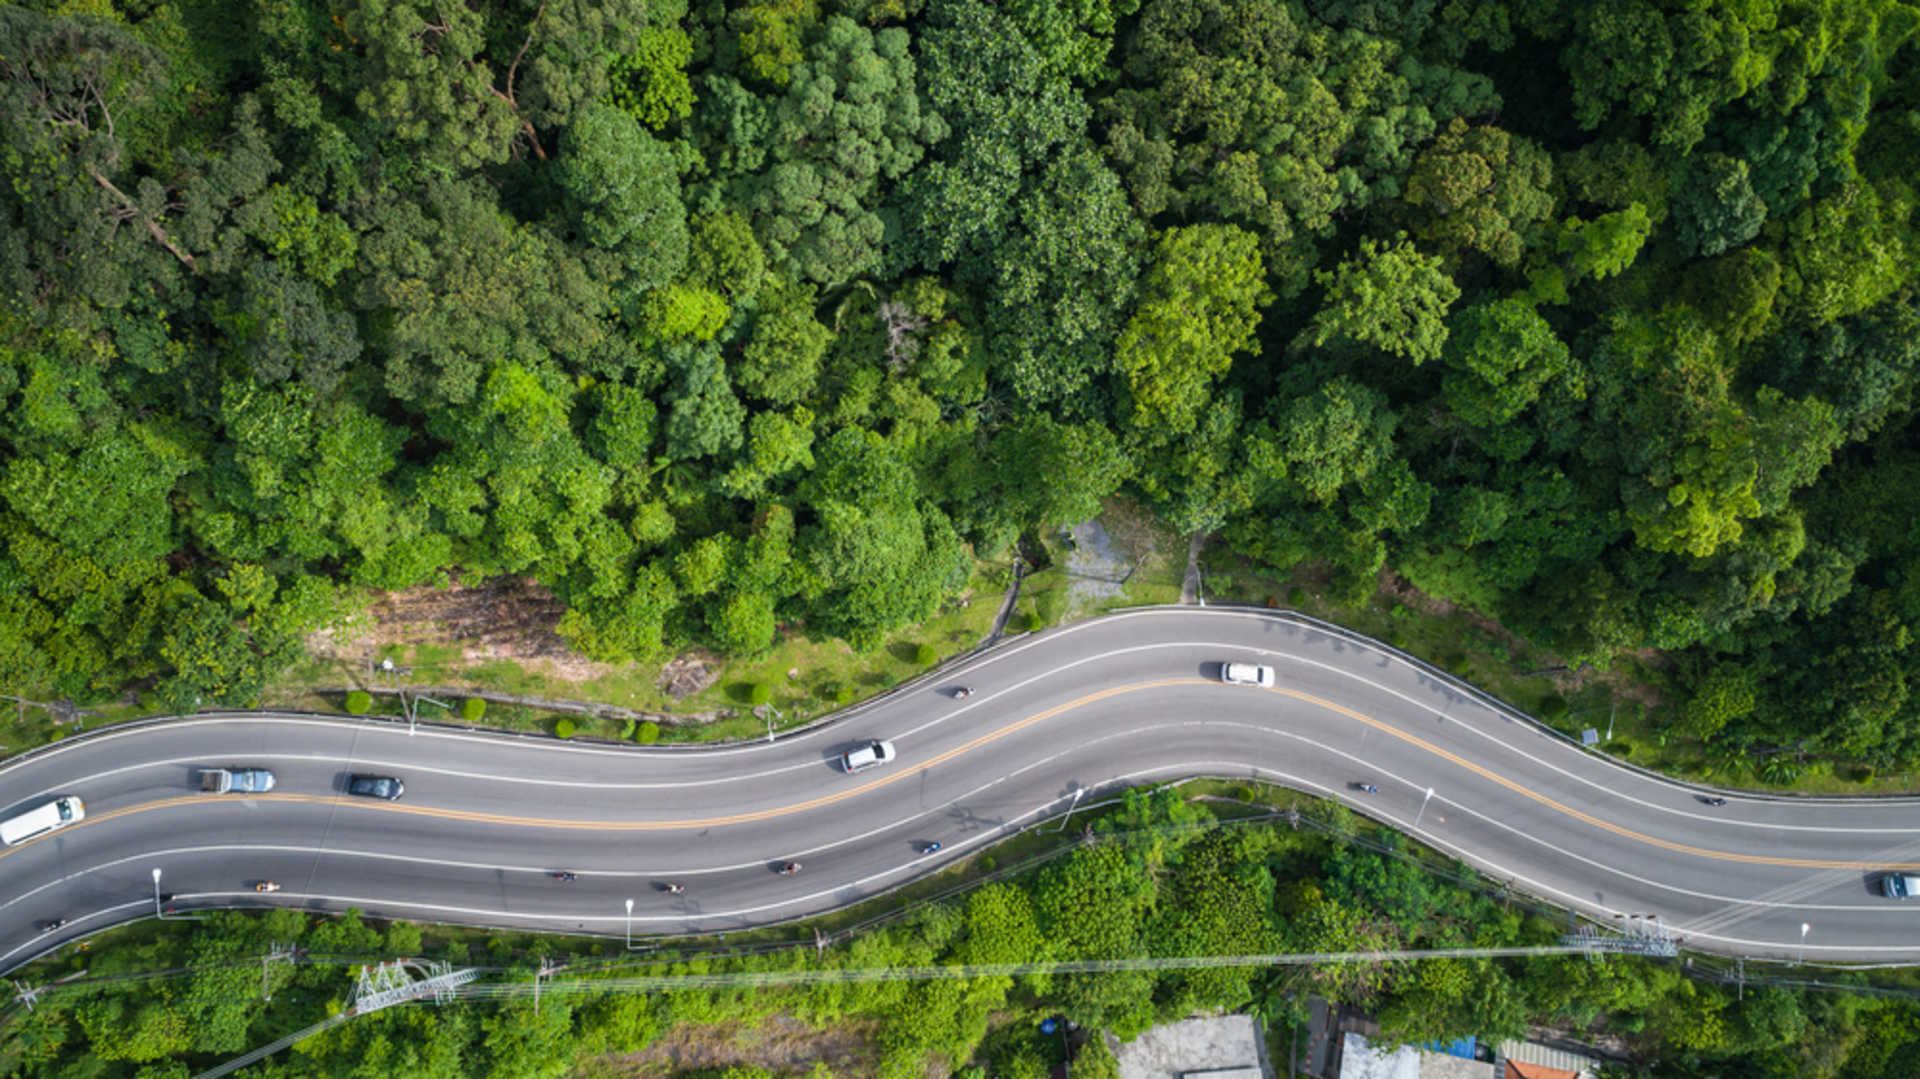 stock-photo-top-view-car-and-road-on-the-hill-in-phuket-thailand-aerial-view-from-flying-drone-633127292